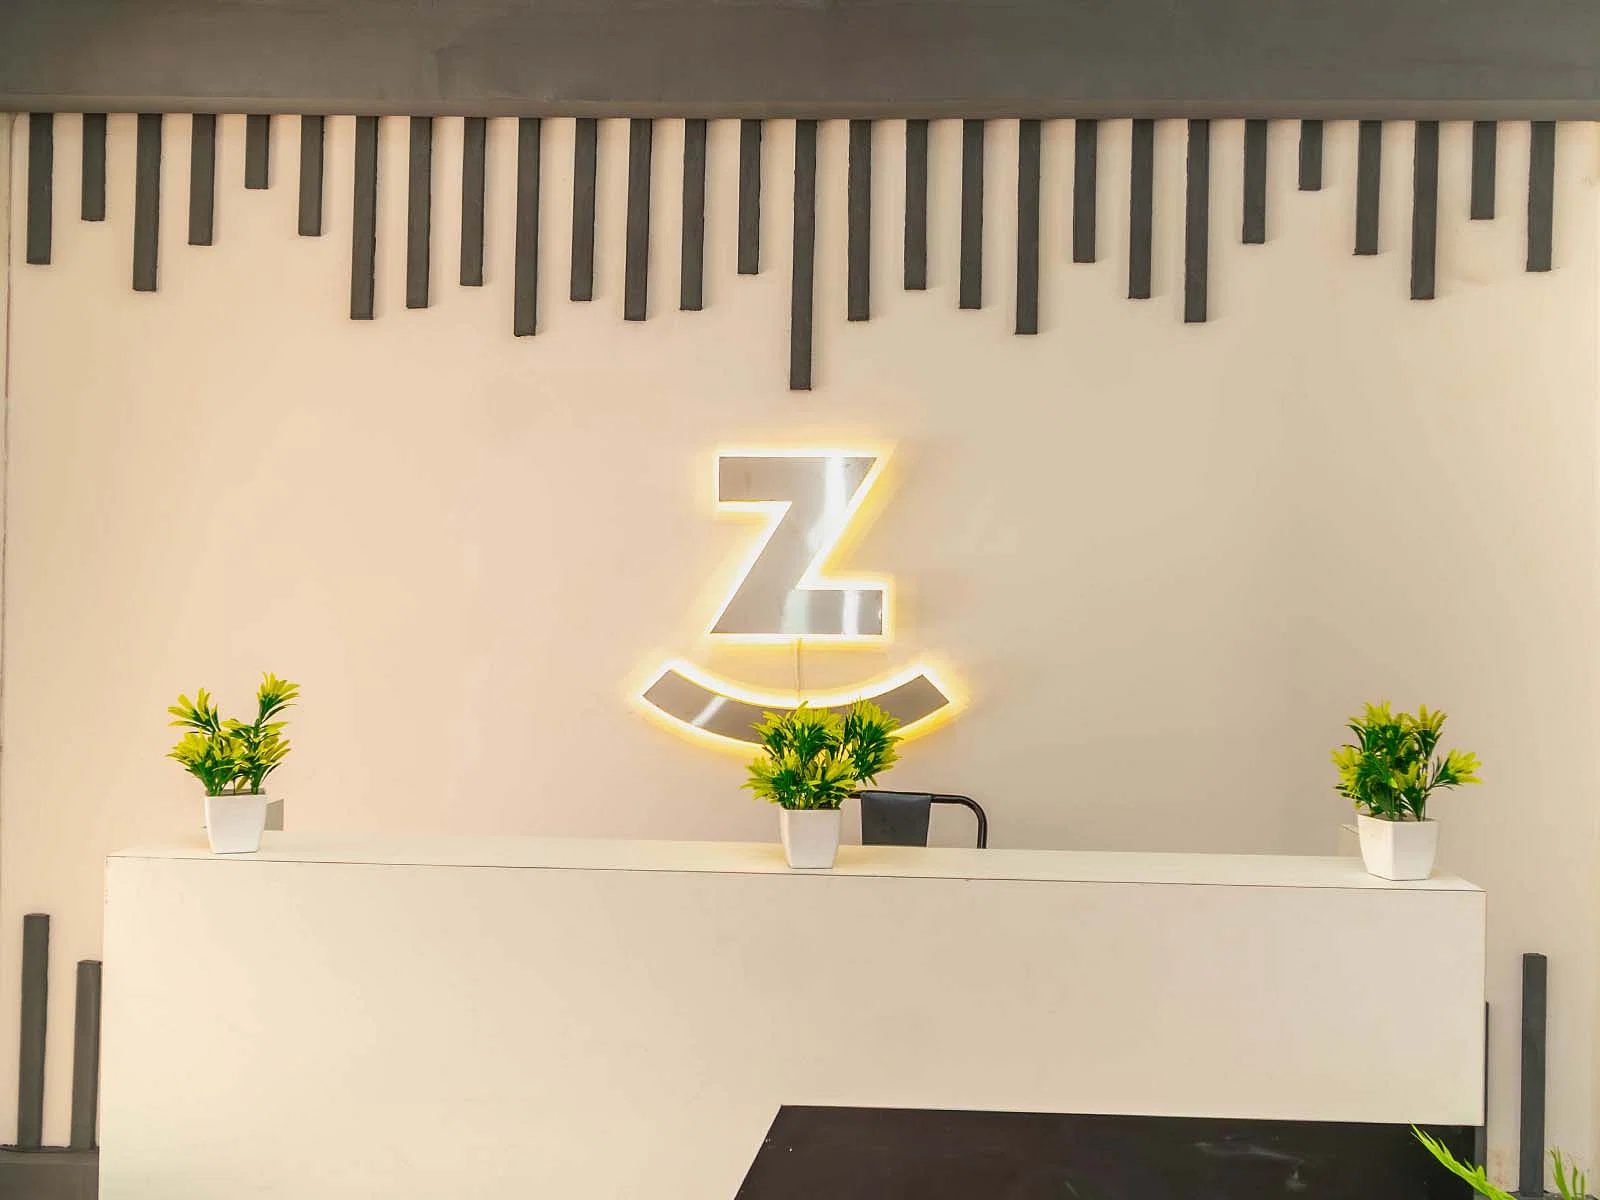 budget-friendly PGs and hostels for unisex with single rooms with daily hopusekeeping-Zolo Calista